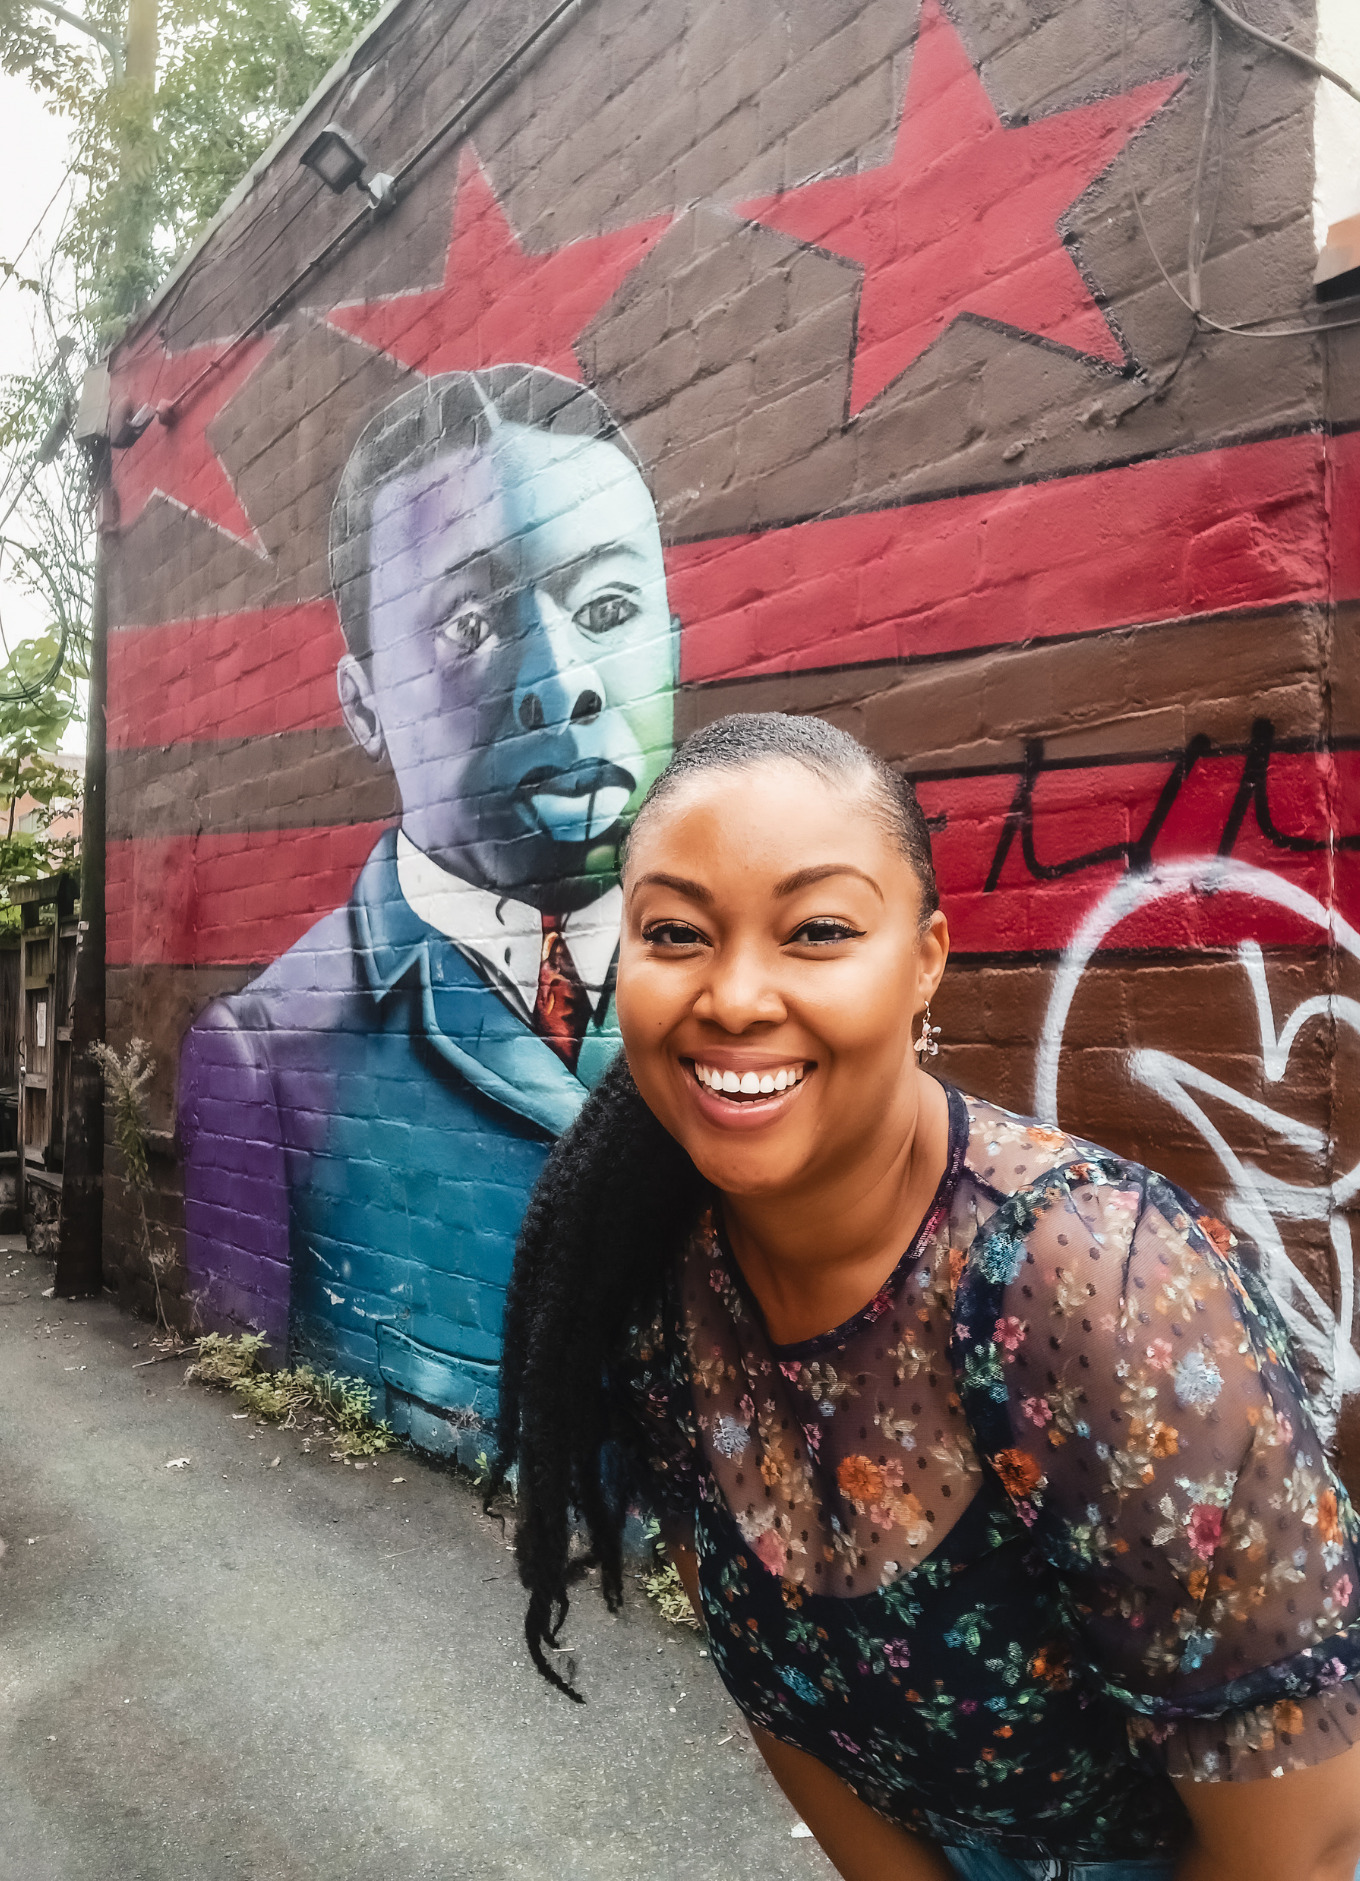 This Bahamian Gyal blogger, Rogan Smith poses in front of a mural in Washington, DC